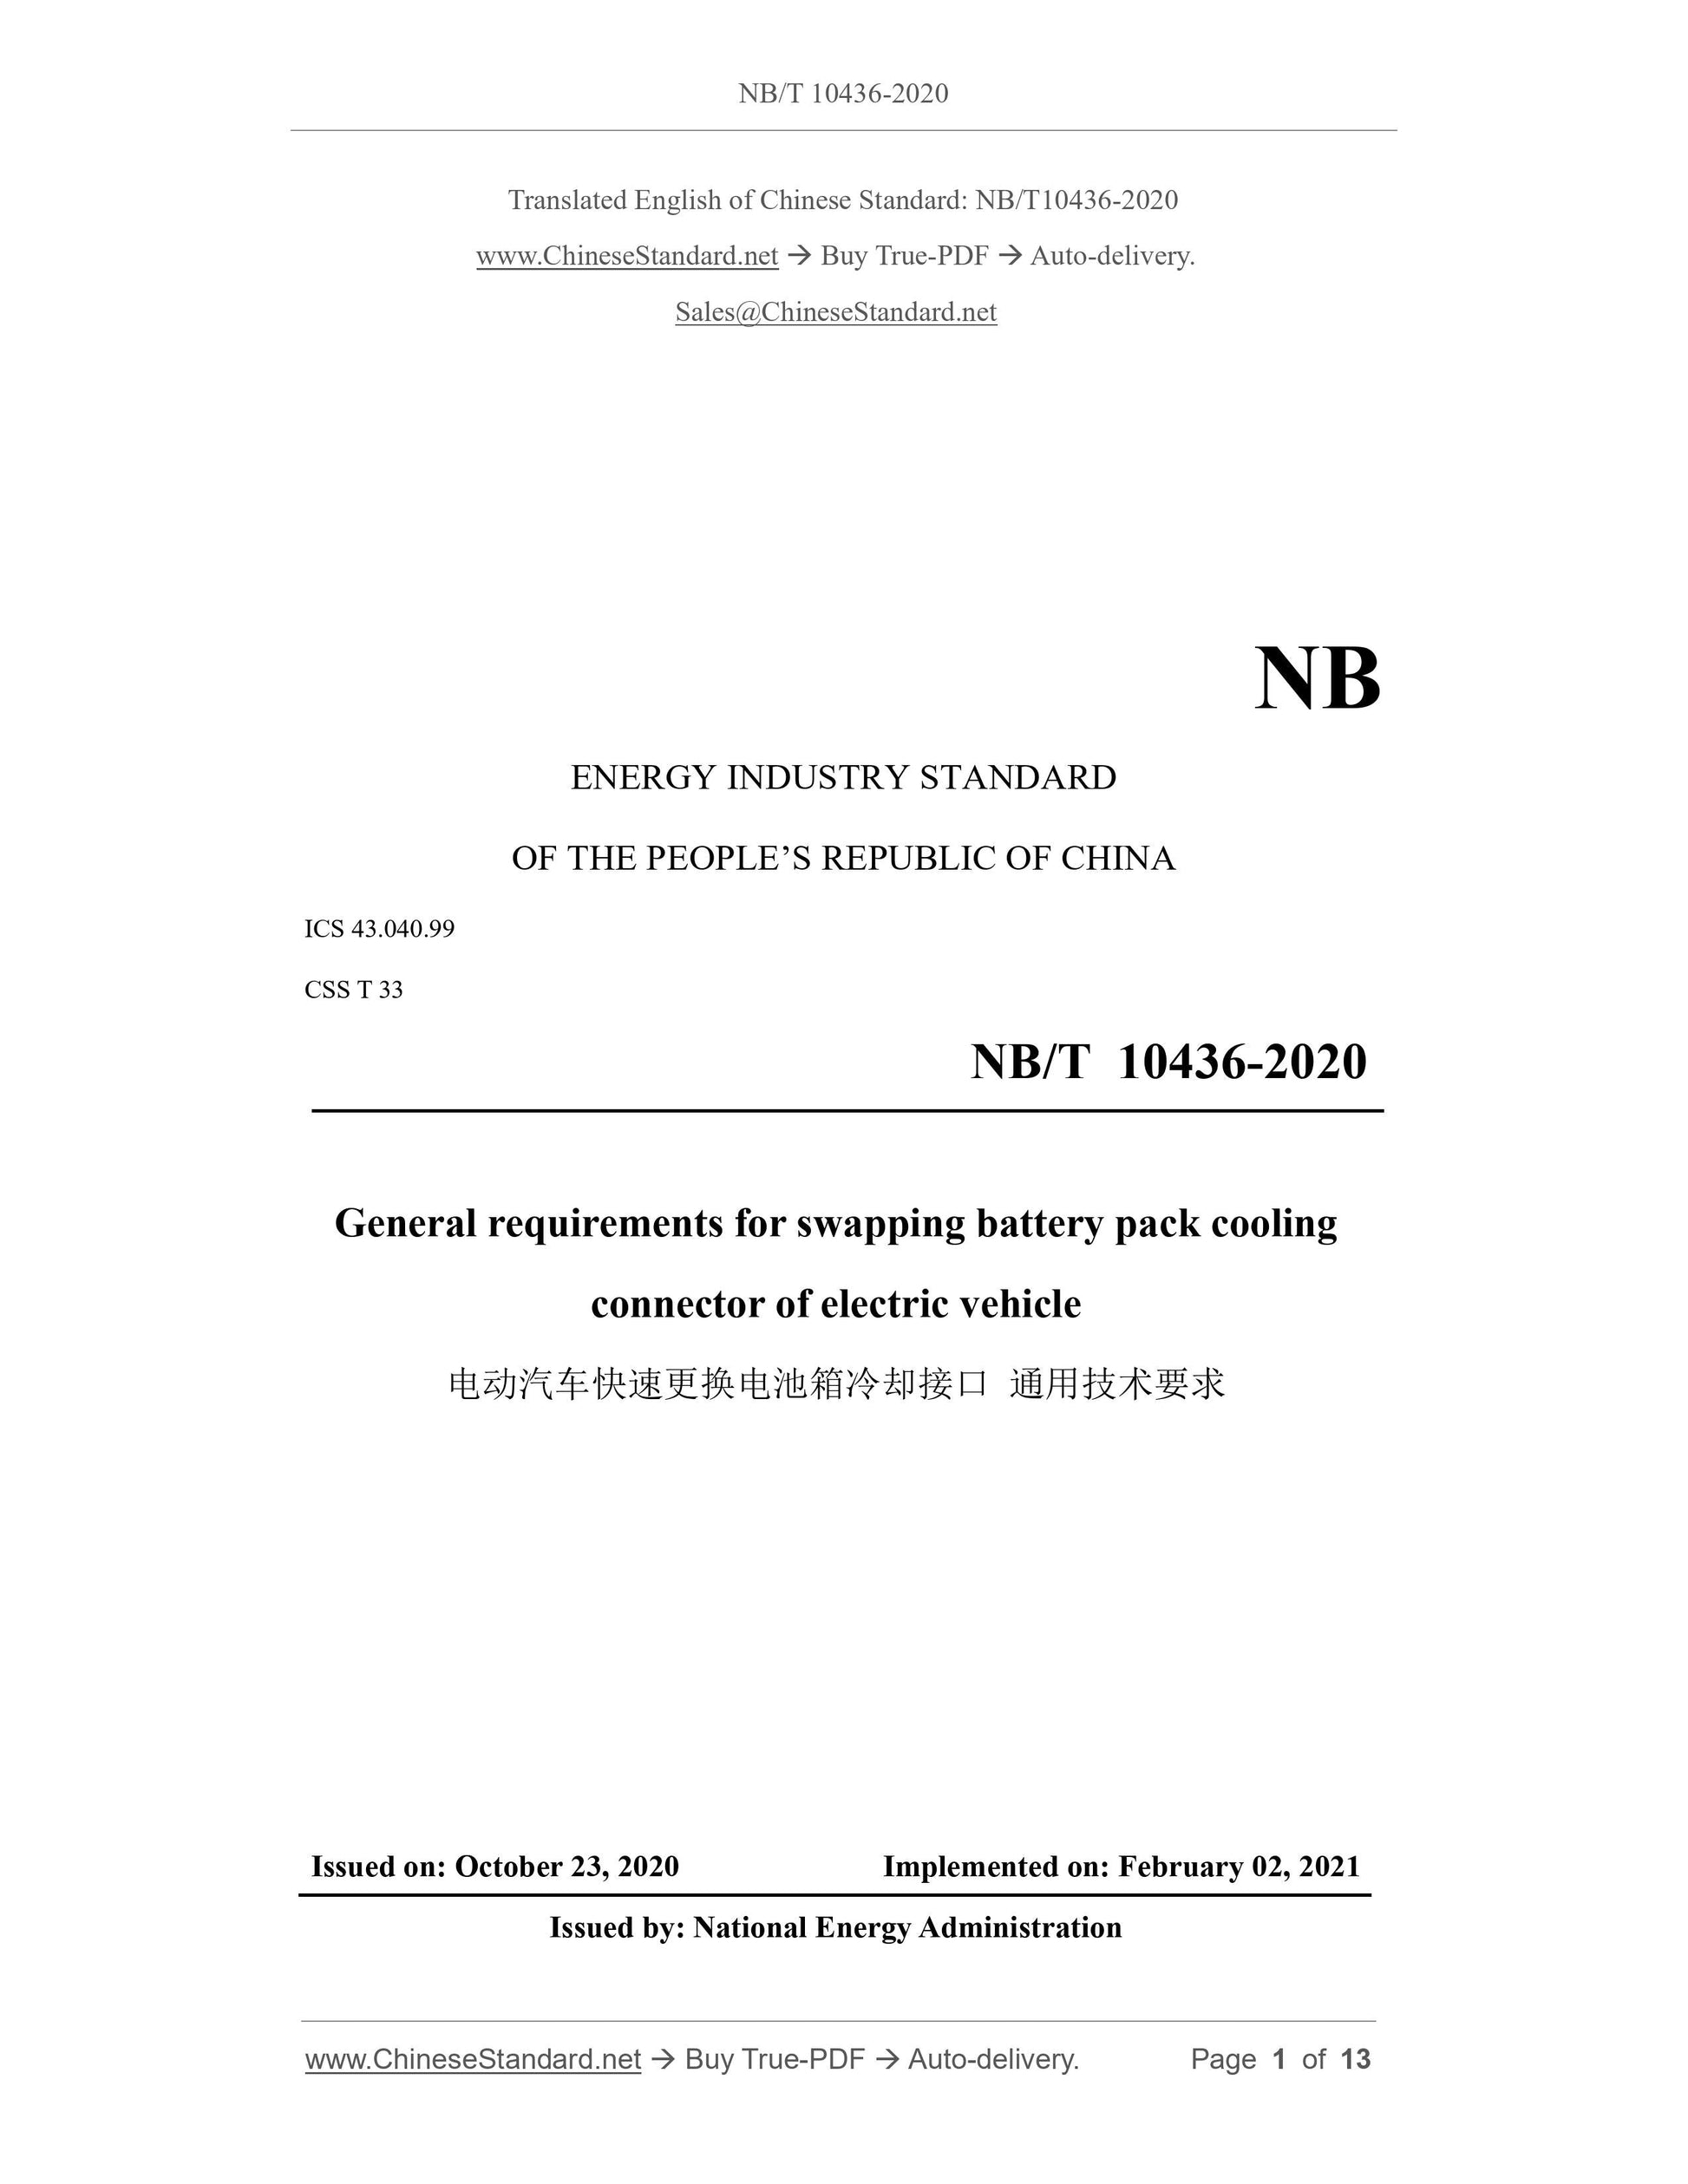 NB/T 10436-2020 Page 1